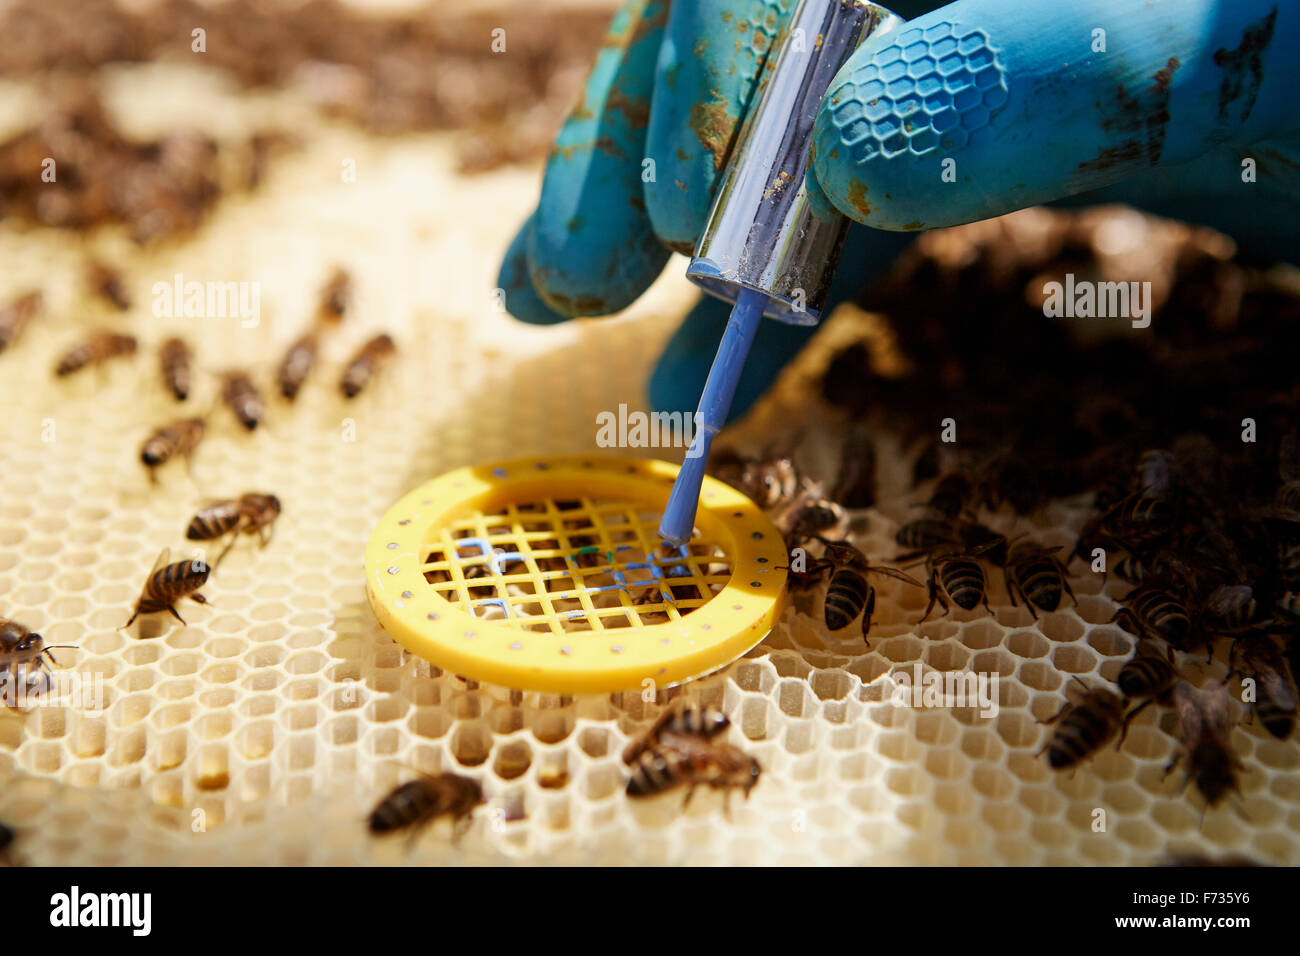 A beekeeper placing a queen cage on a super in a beehive. Stock Photo